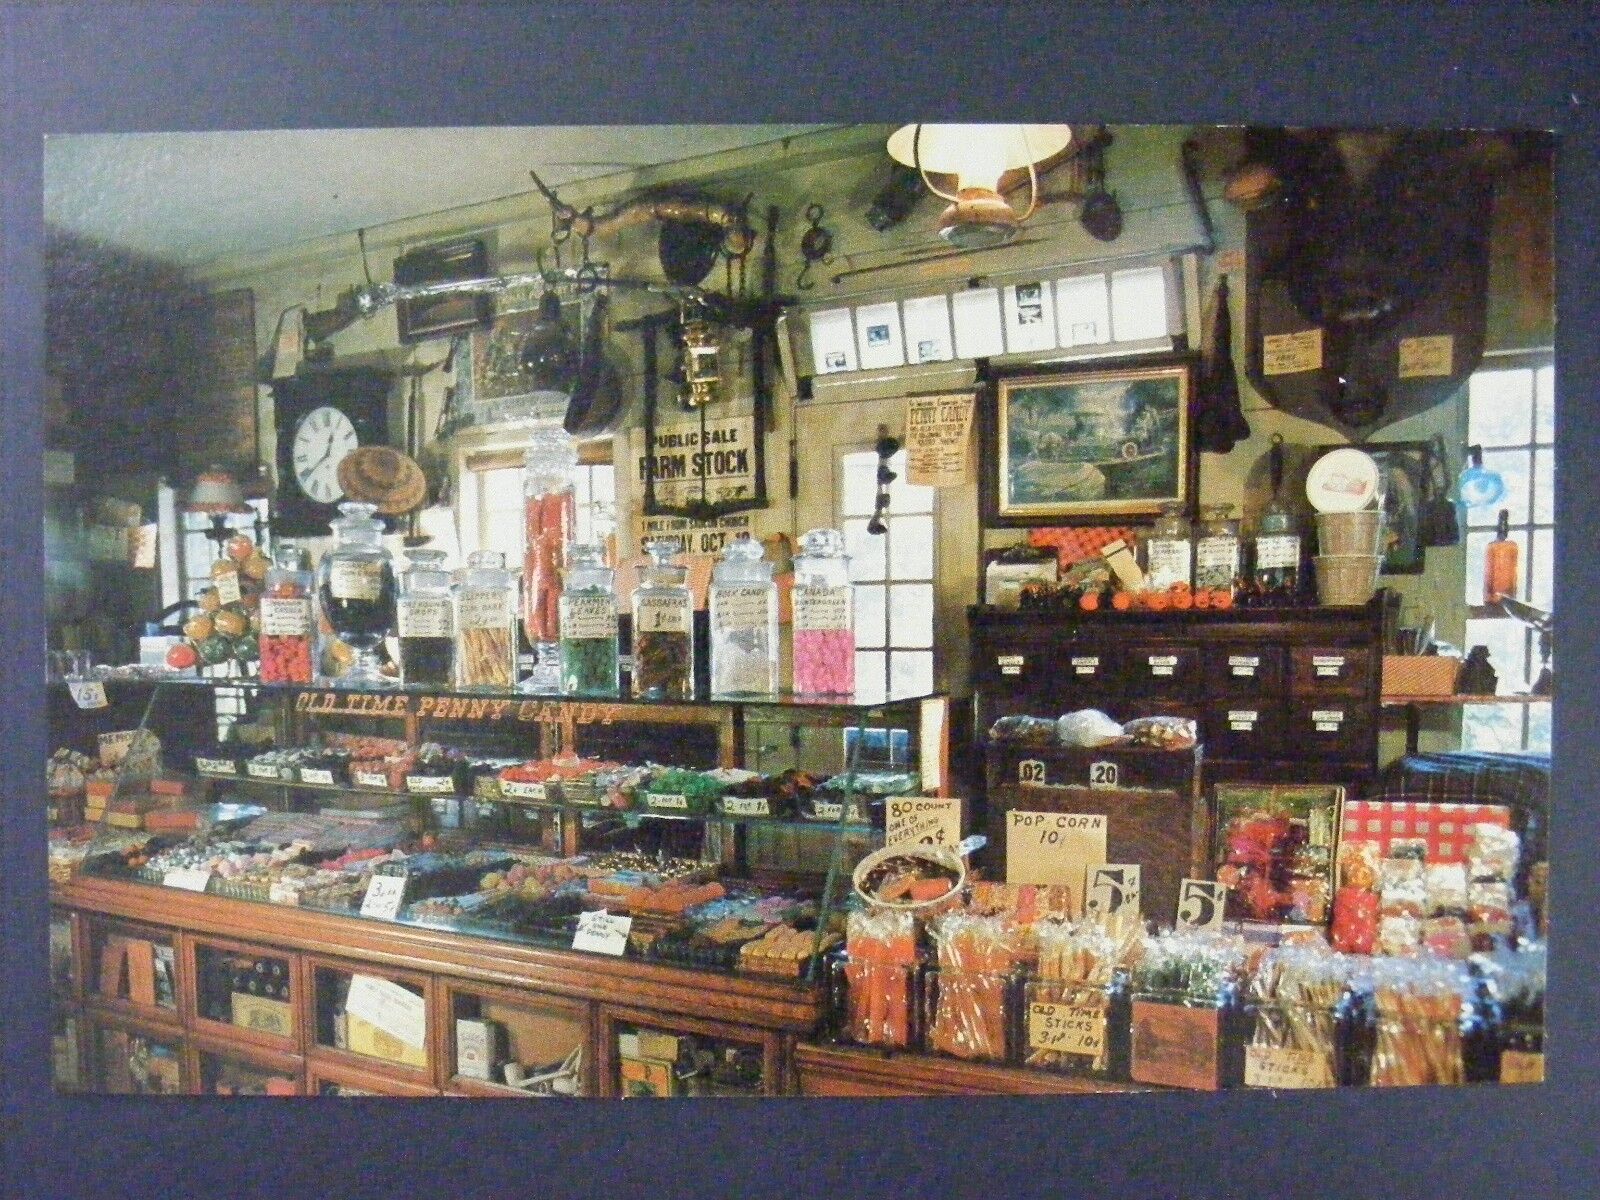 South Sudbury Mass Wayside Country Store Penny Candy Counter Postcard 1950s Vtg